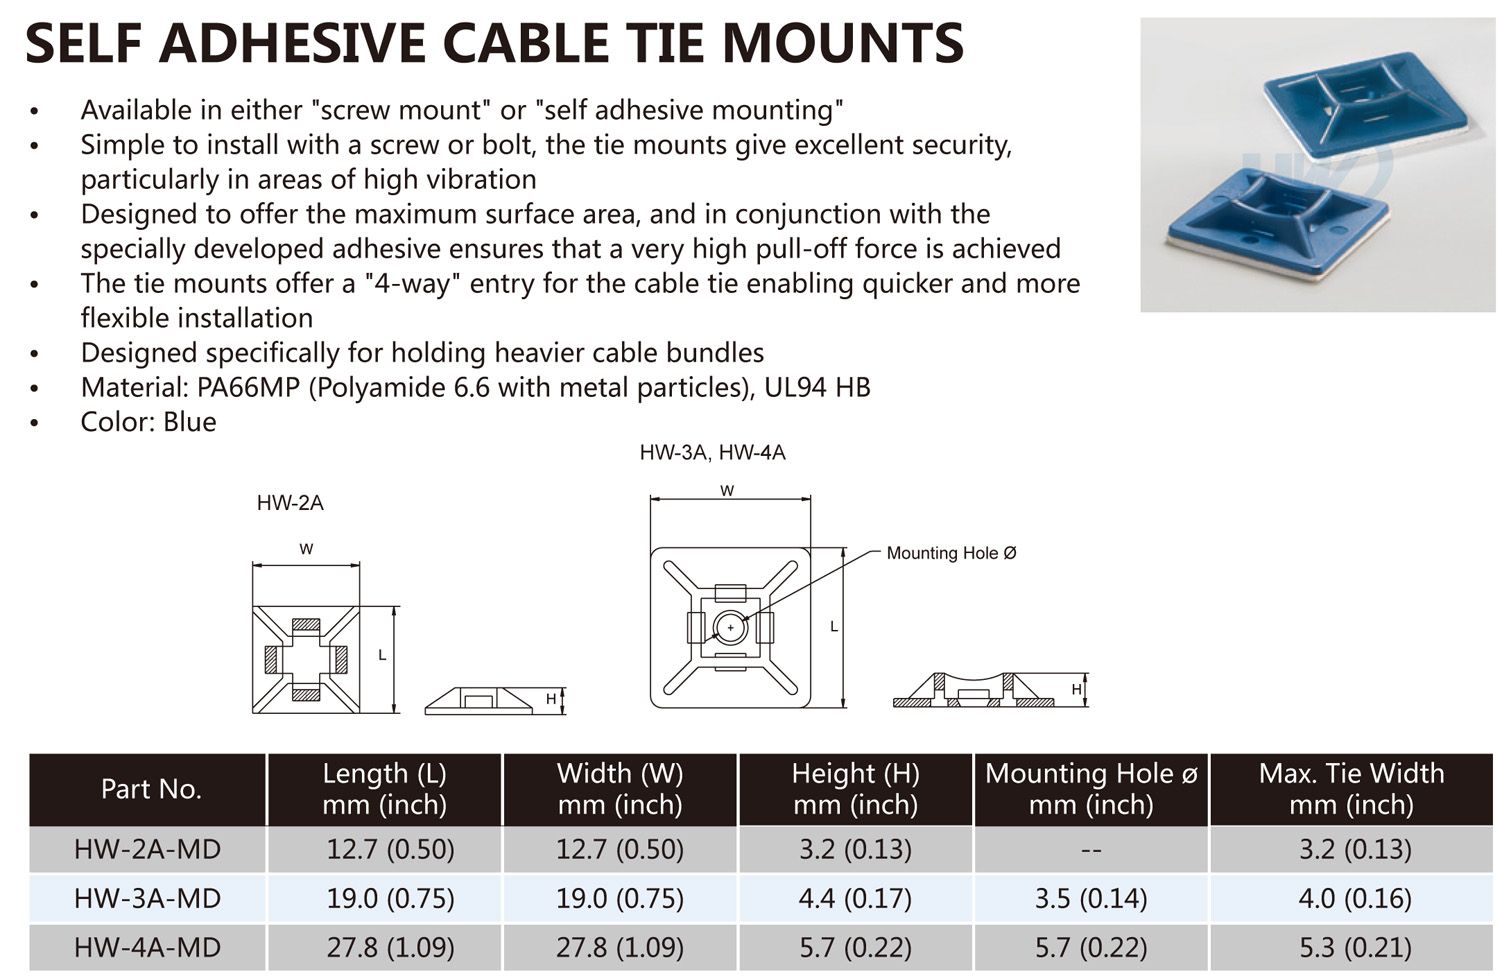 Specification of Metal Detectable Self-Adhesive Cable Tie Mounts